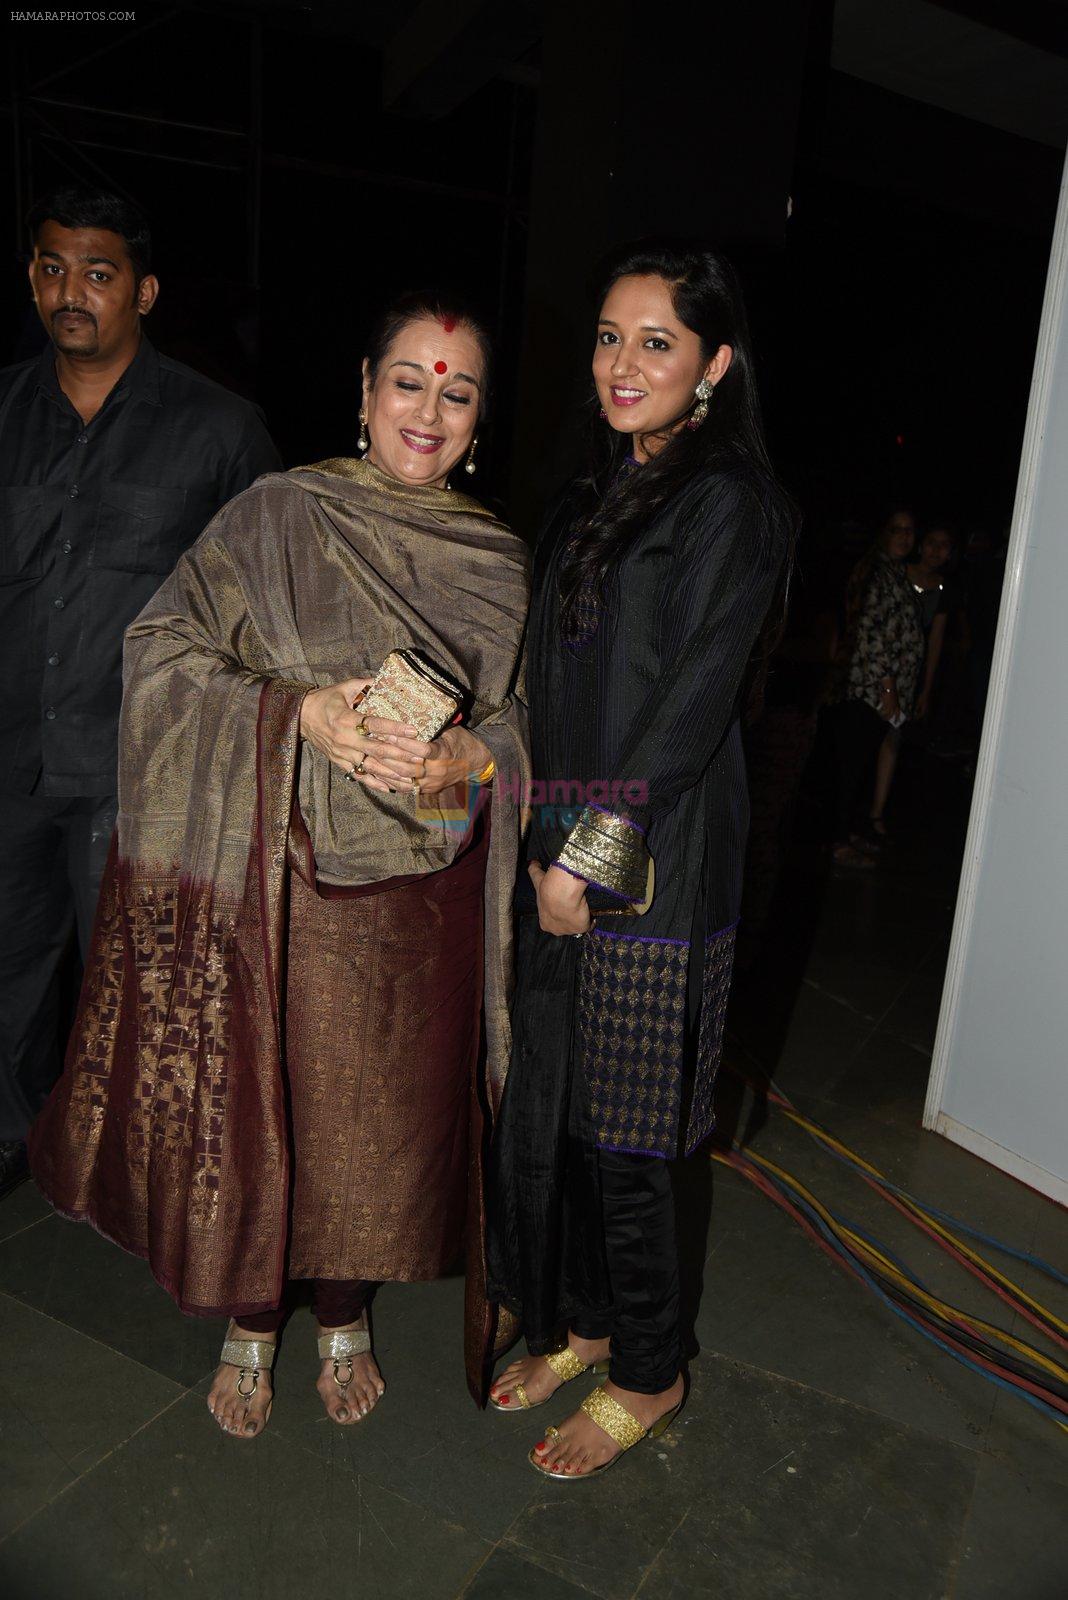 Poonam Sinha at Shaina NC-Manish Malhotra Pidilite Show for CPAA on 1st March 2015